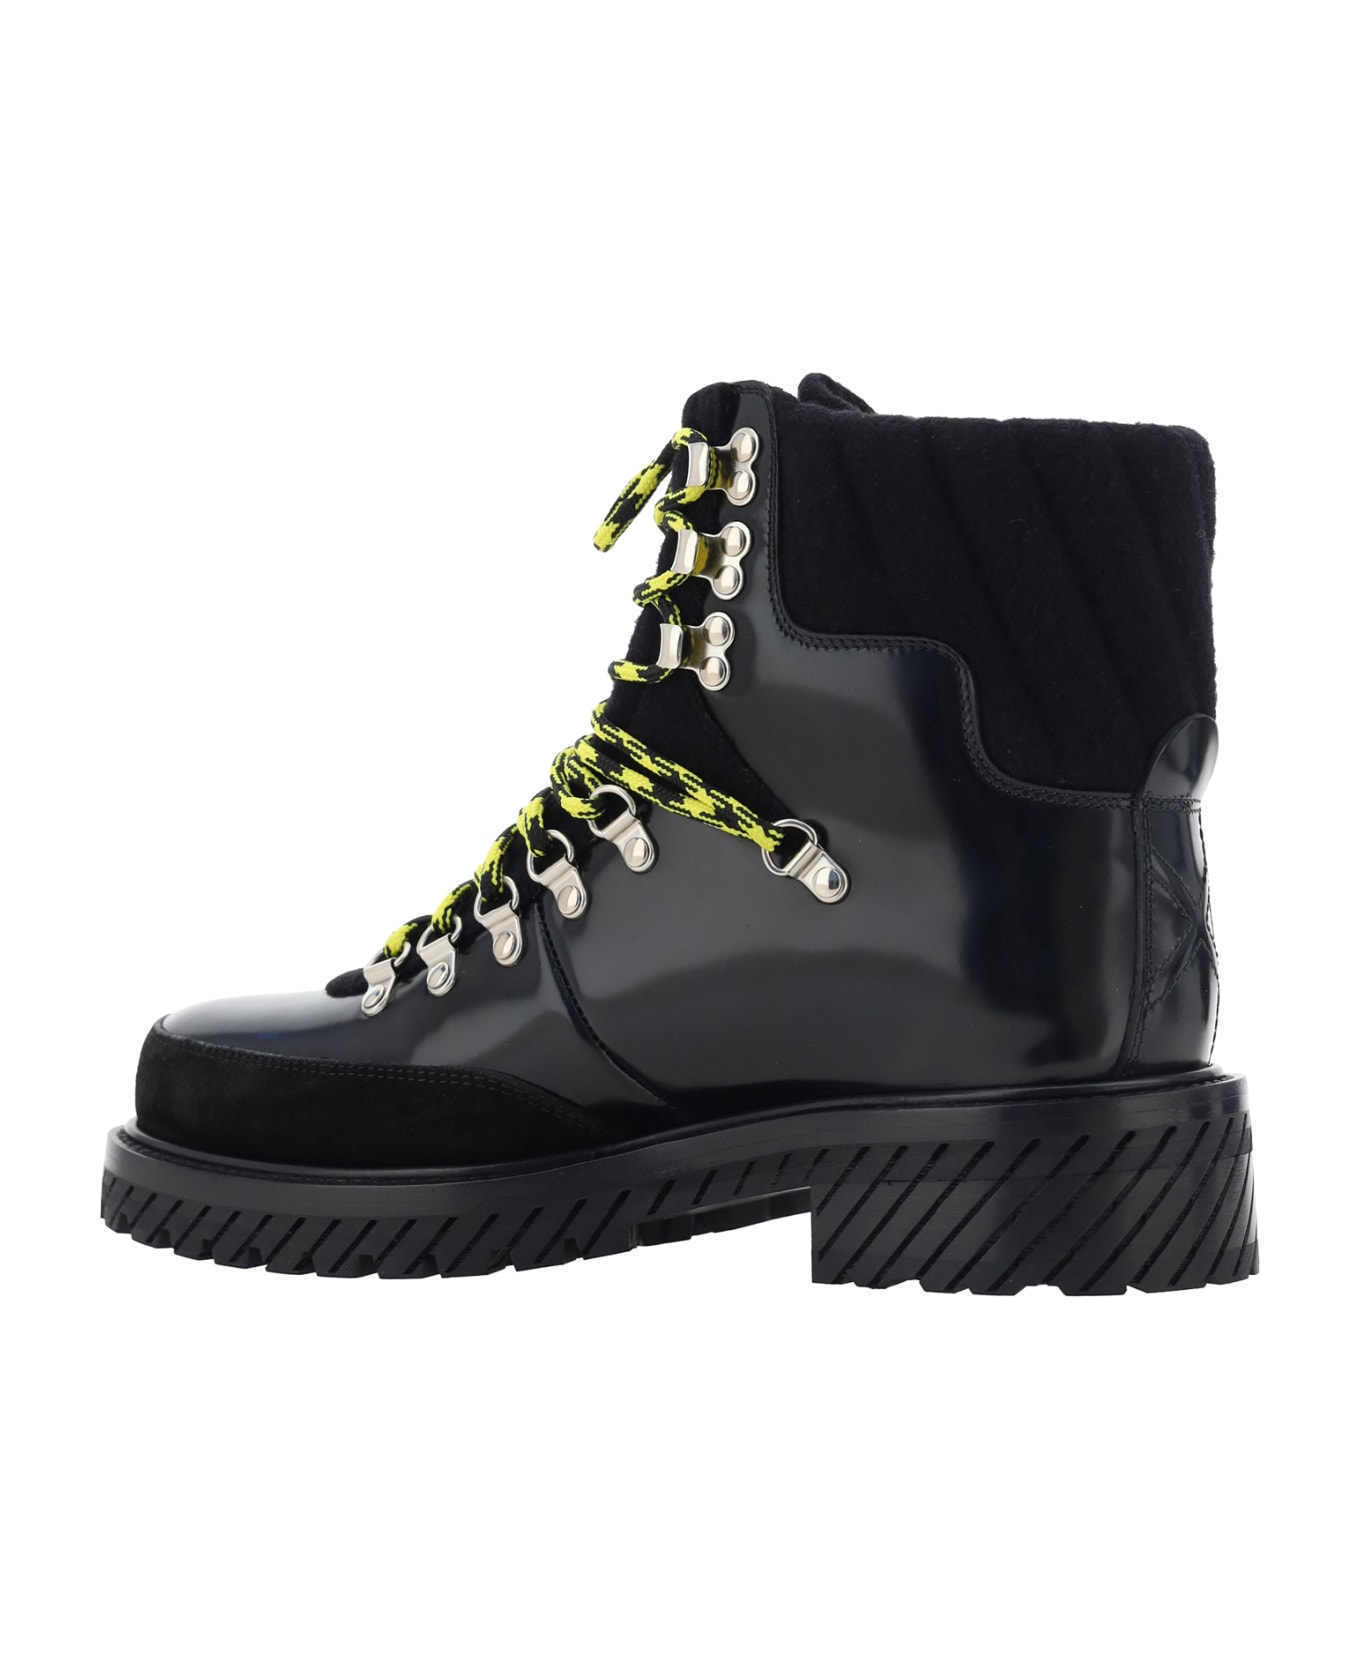 Off-White Gstaad Lace-up Boots - Black Blac